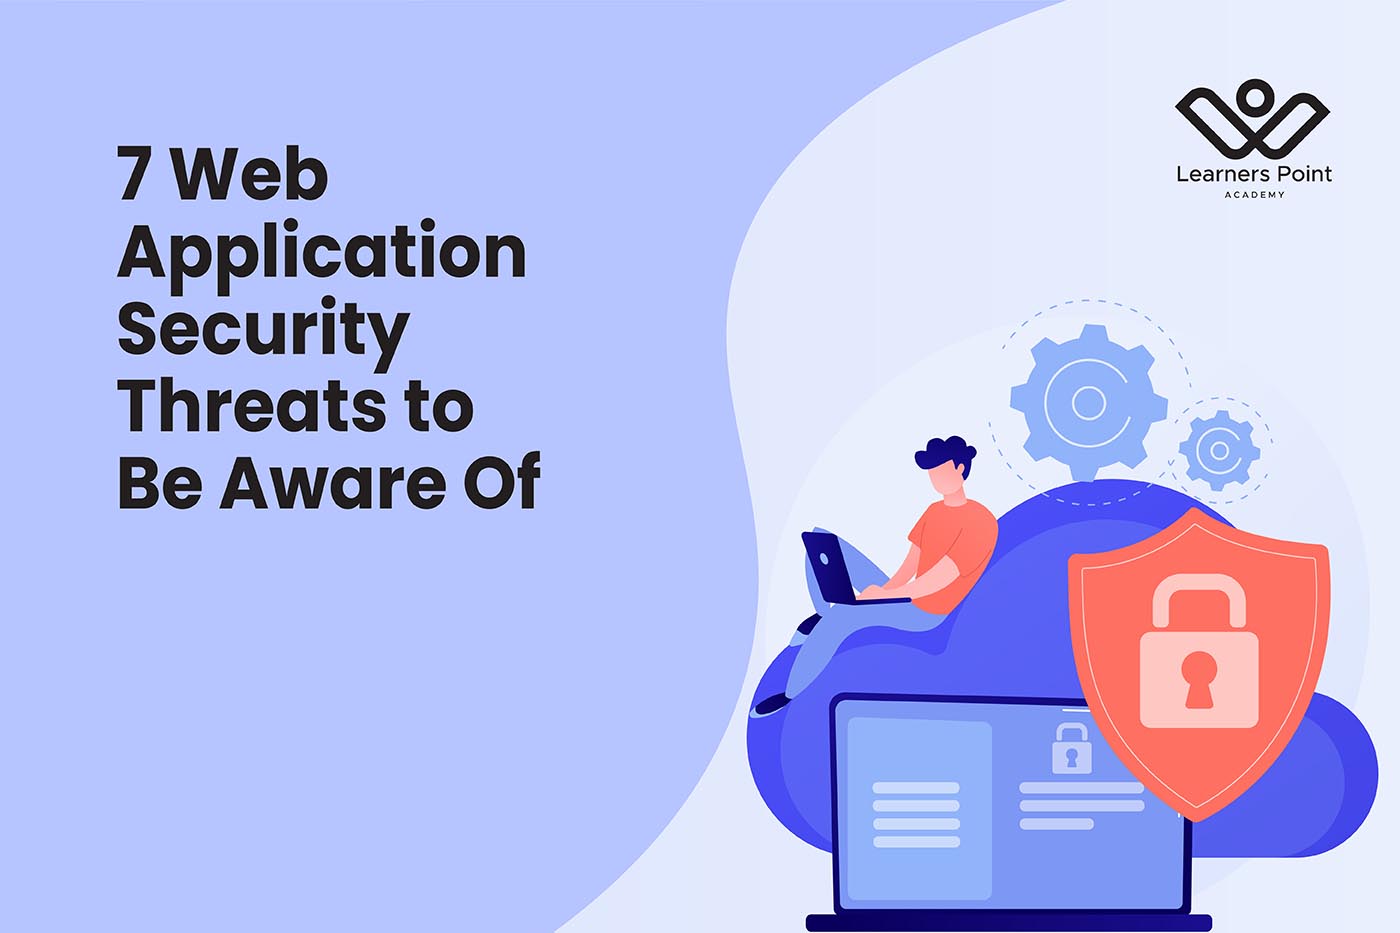 7 Web Application Security Threats to Be Aware Of